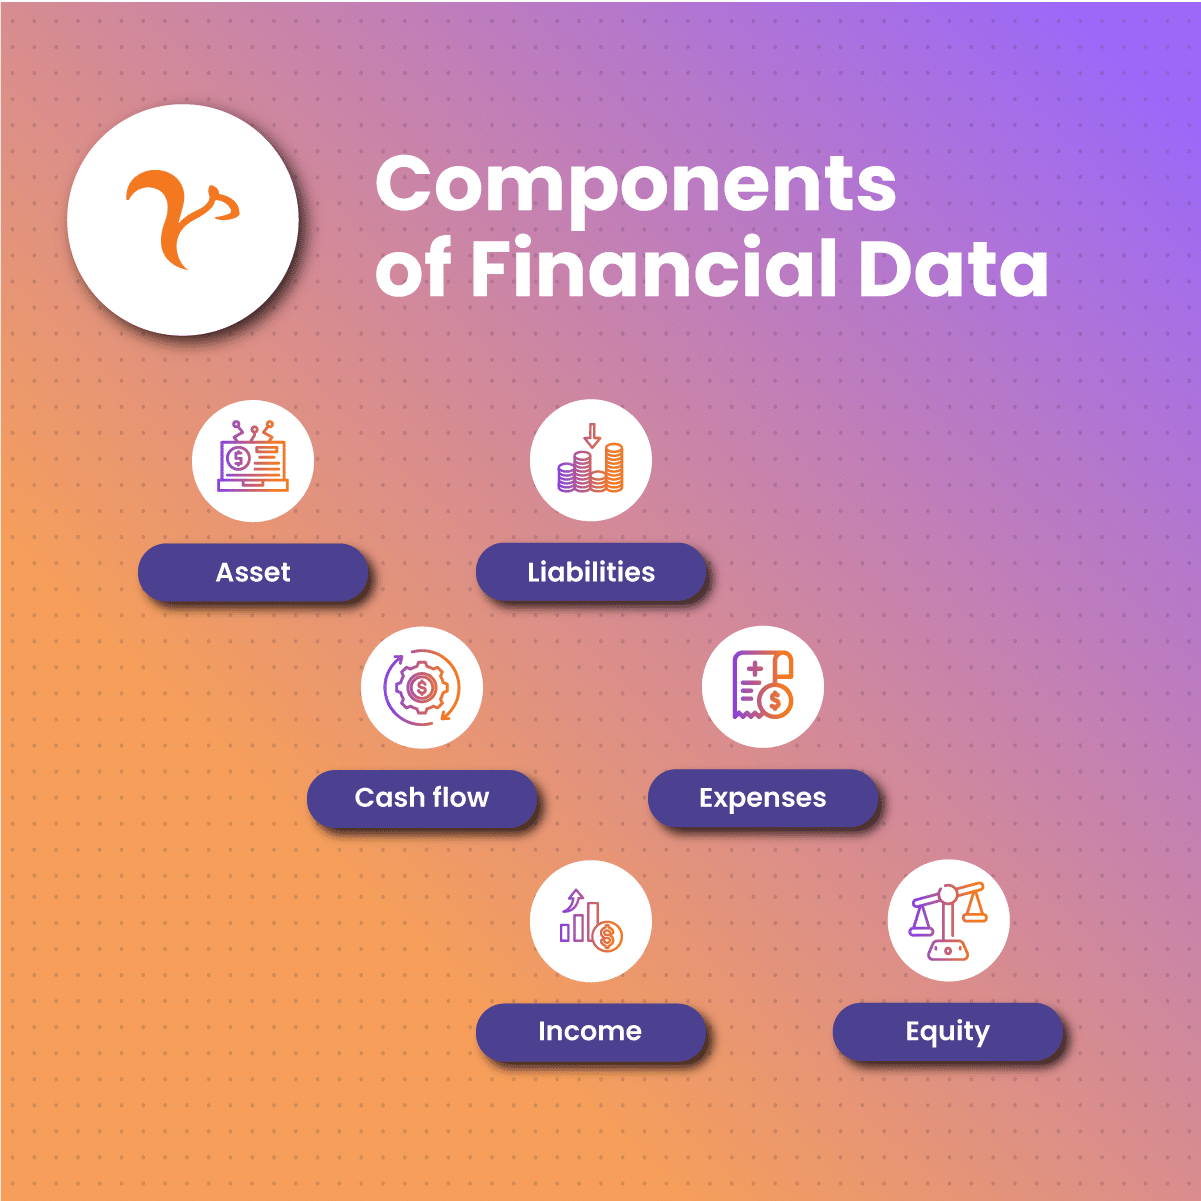 Components of Financial Data